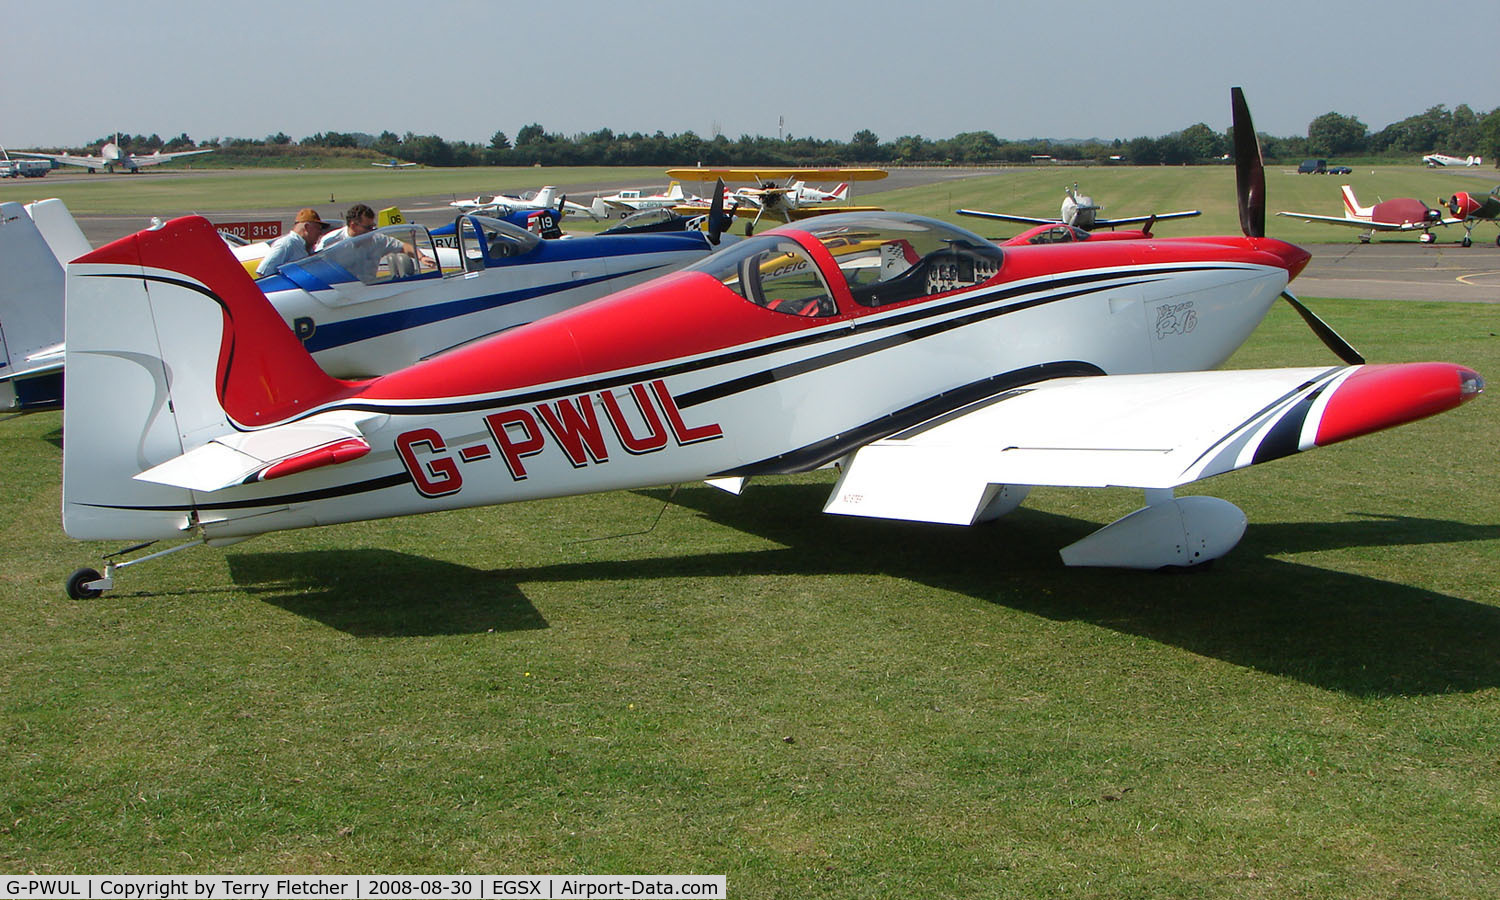 G-PWUL, 2006 Vans RV-6 C/N PFA 181-12773, Participant in the 2008 RV Fly-in at North Weald Uk